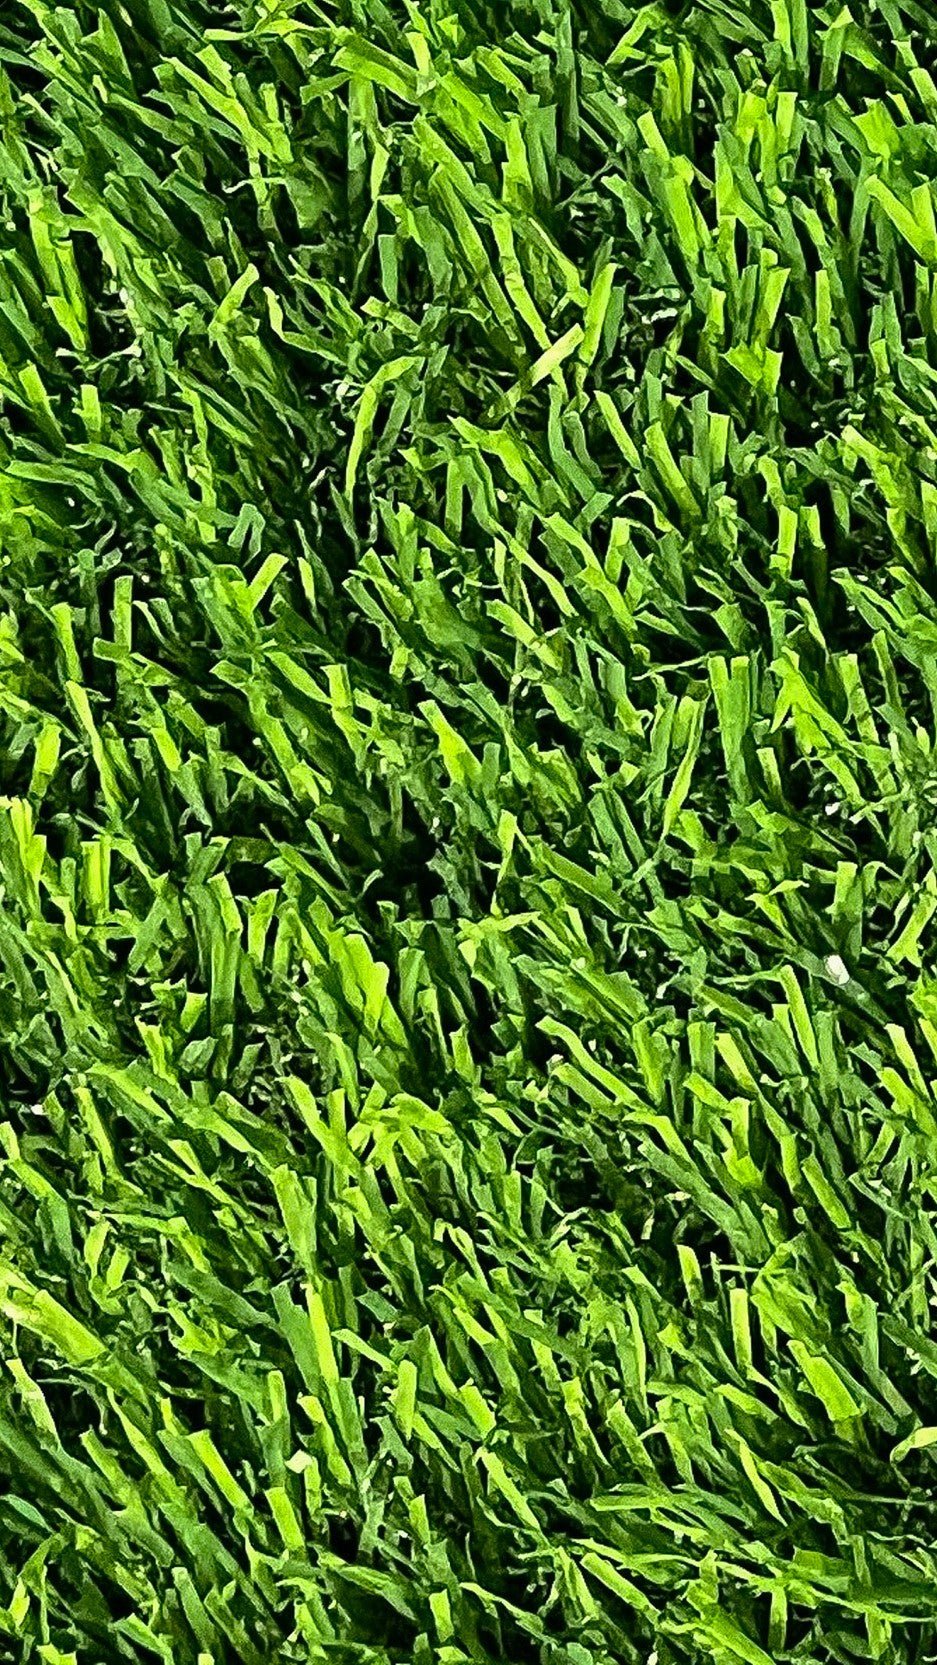 40 MM Grass Zurich Artificial Grass for Indoor and Outdoor Use, Soft and Lush Natural Looking - V Surfaces